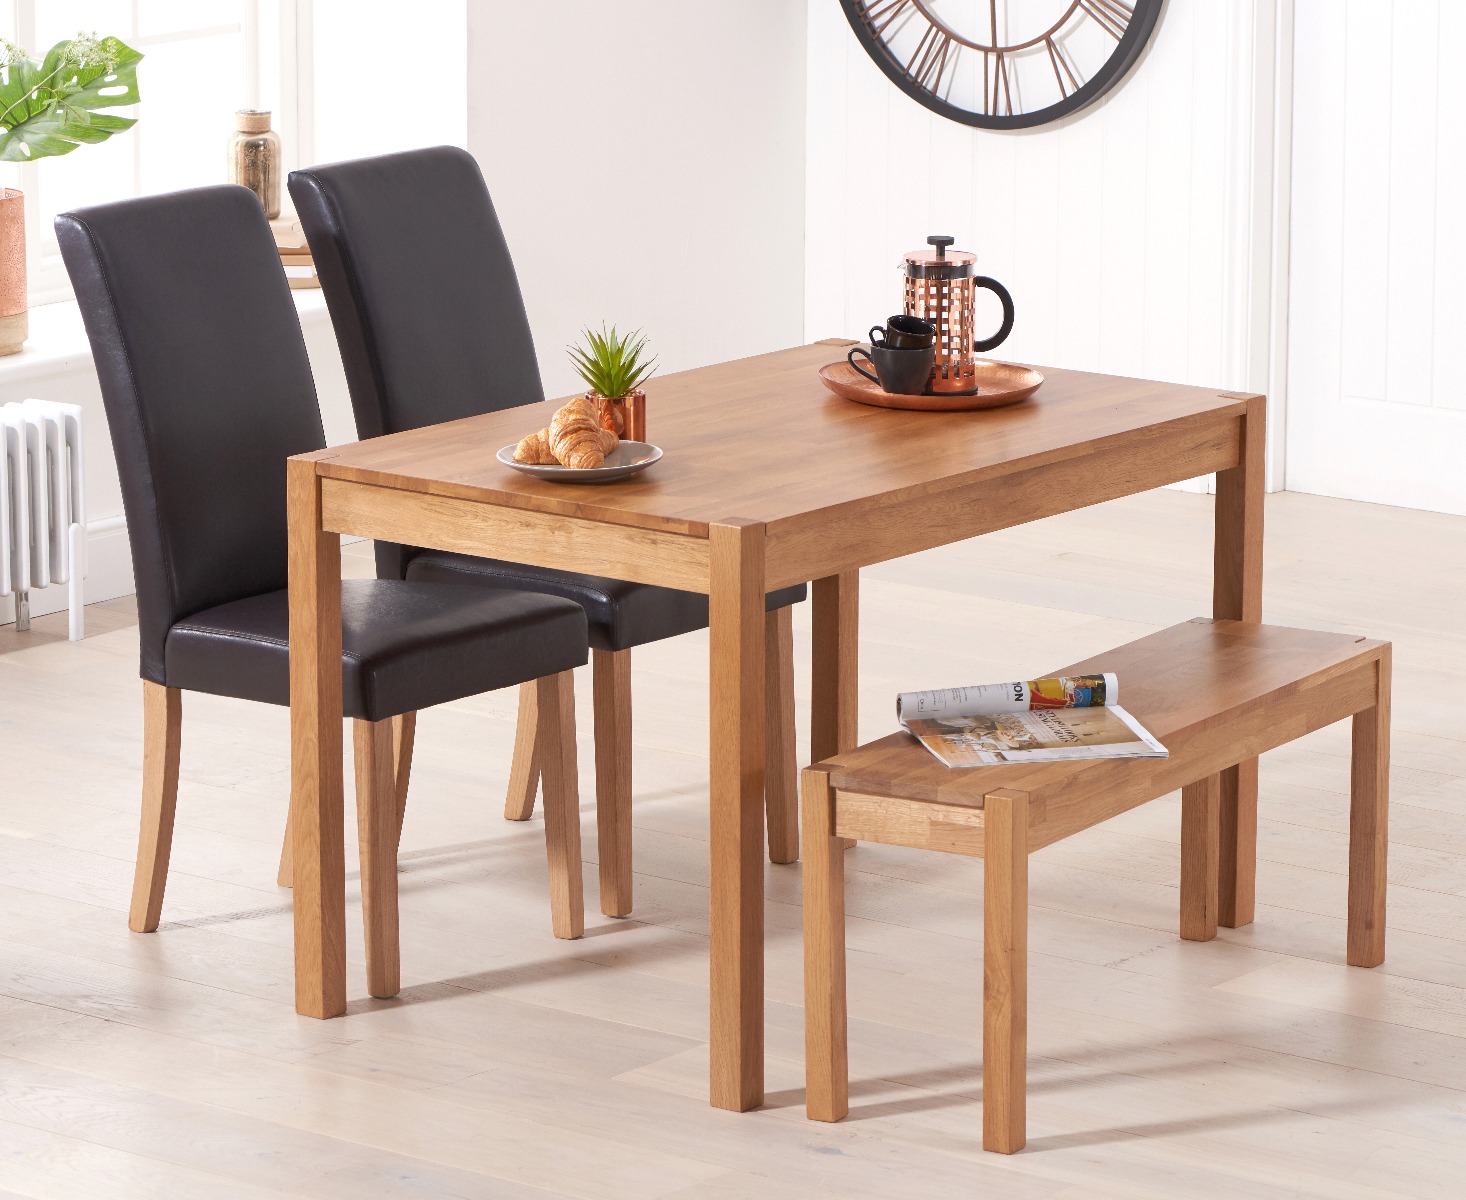 Photo 1 of York 120cm solid oak dining table with 2 brown olivia chairs with 1 oak bench